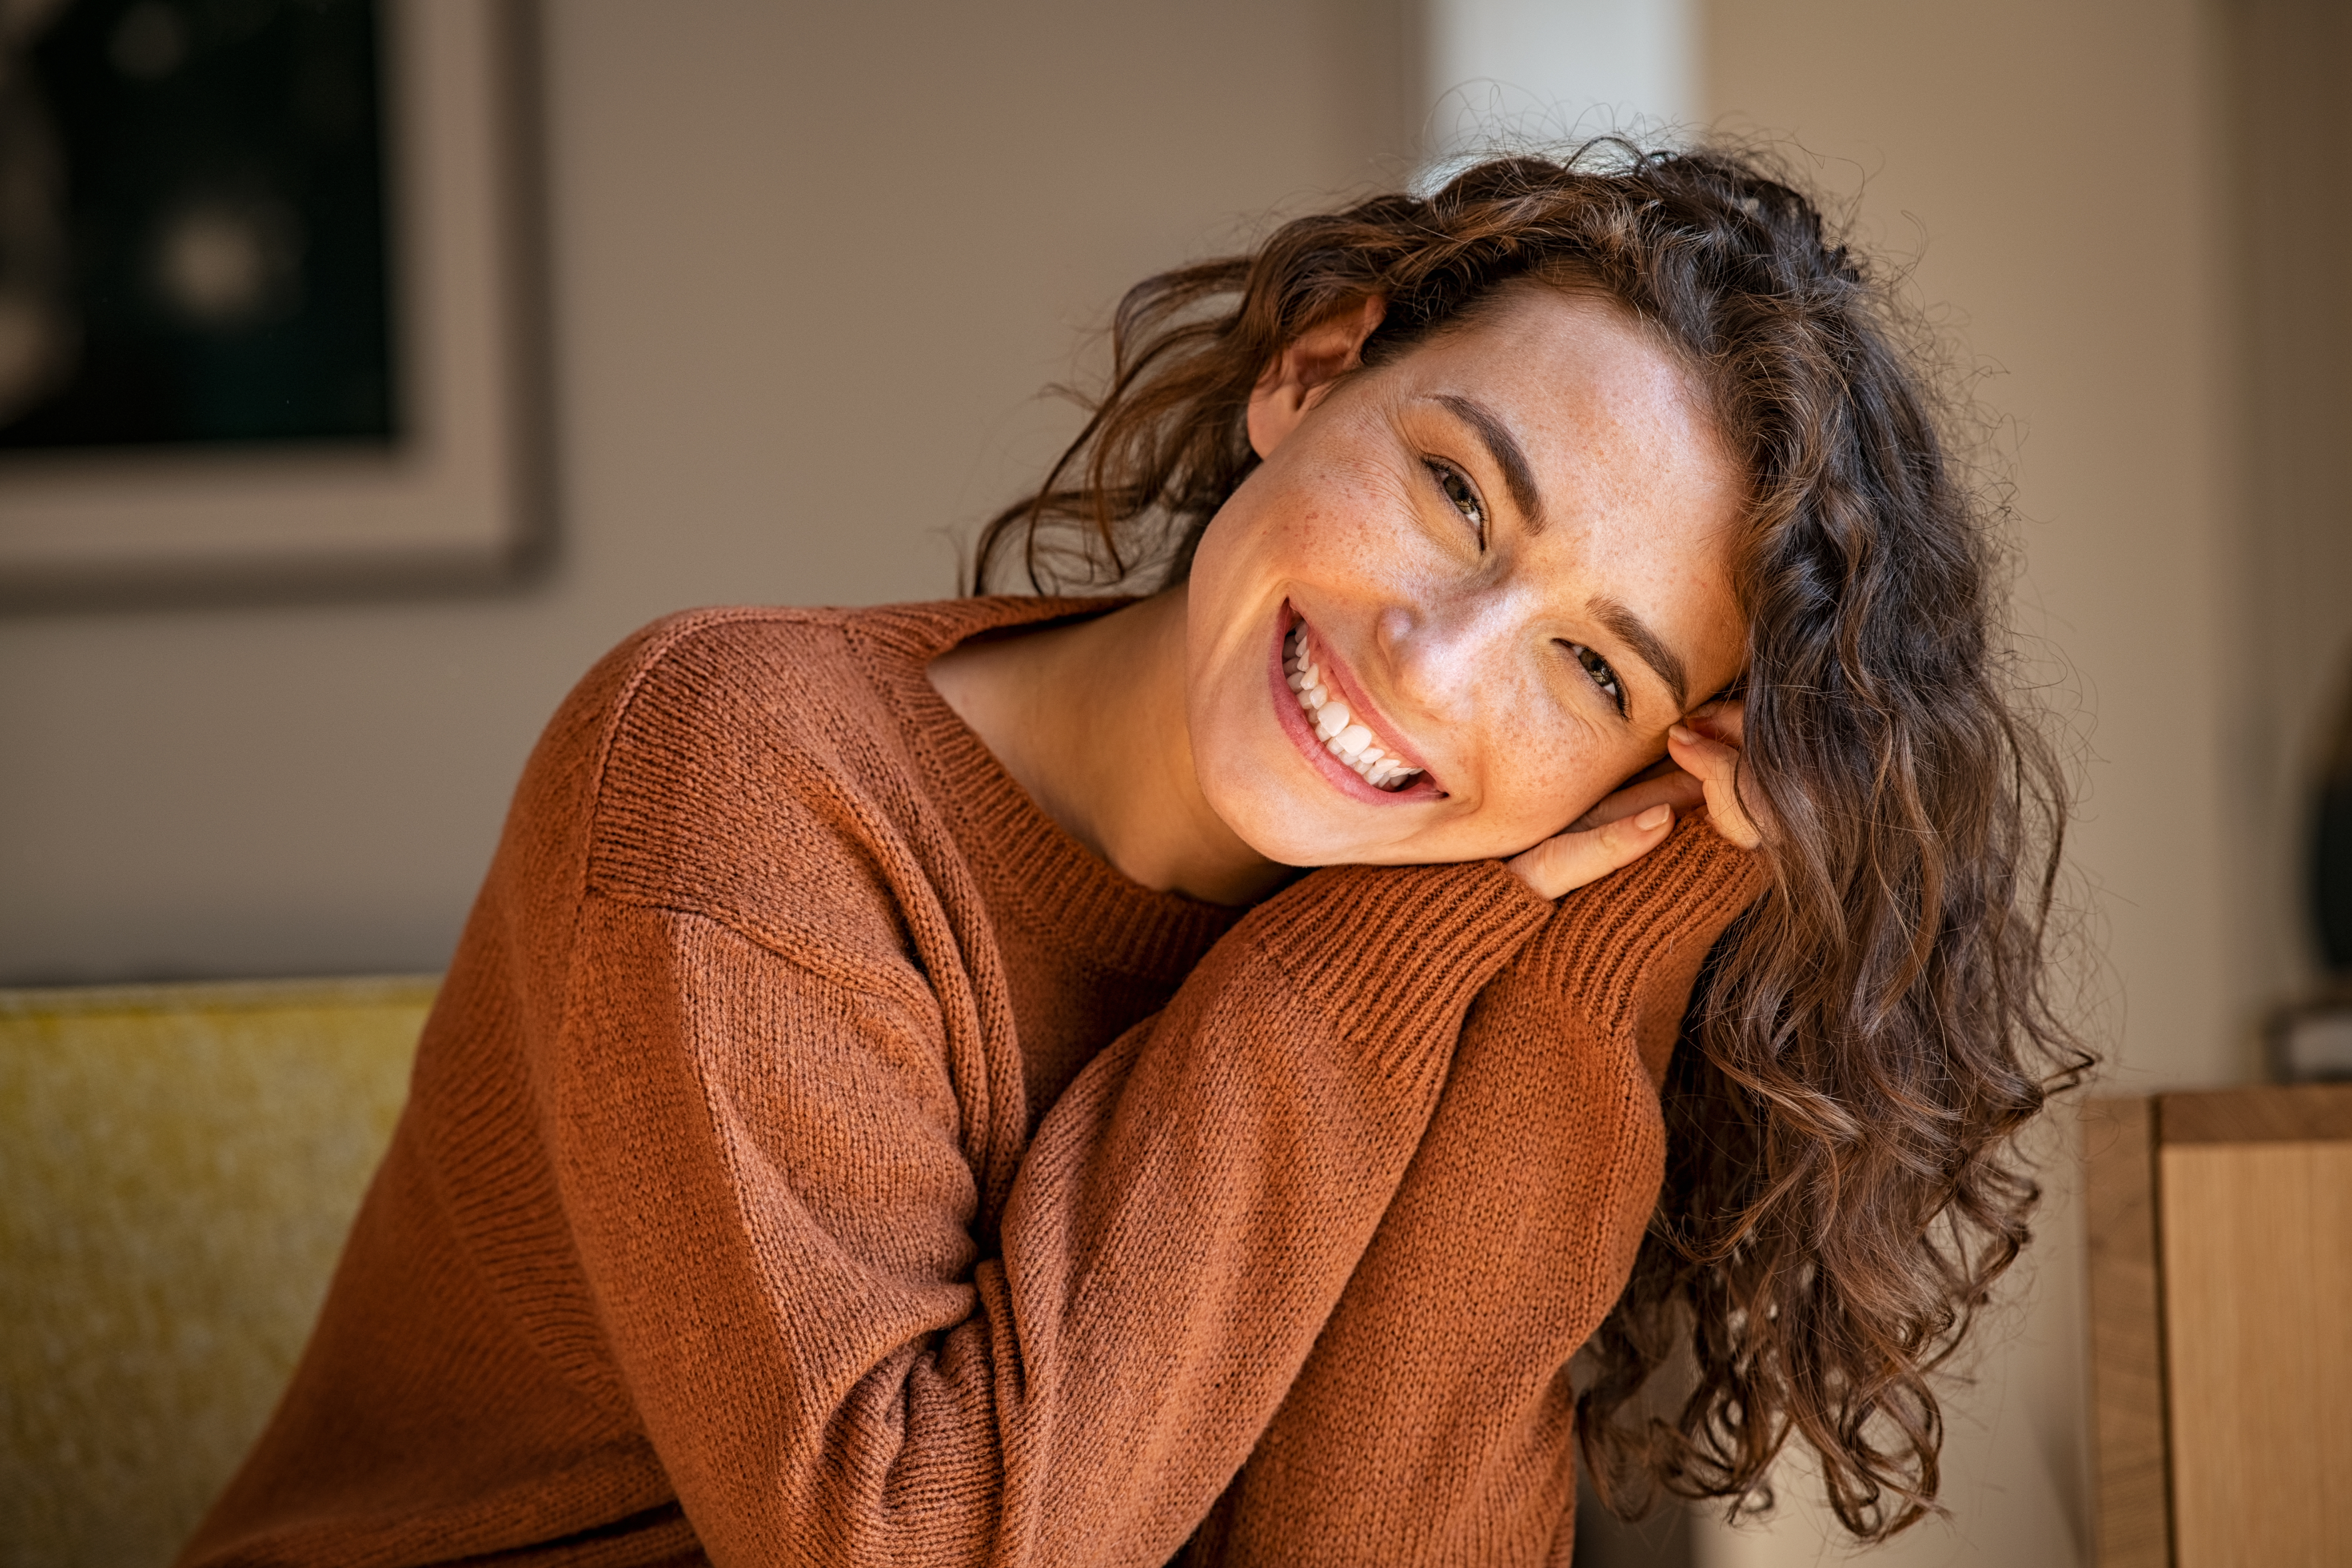 A happy young woman | Source: Shutterstock